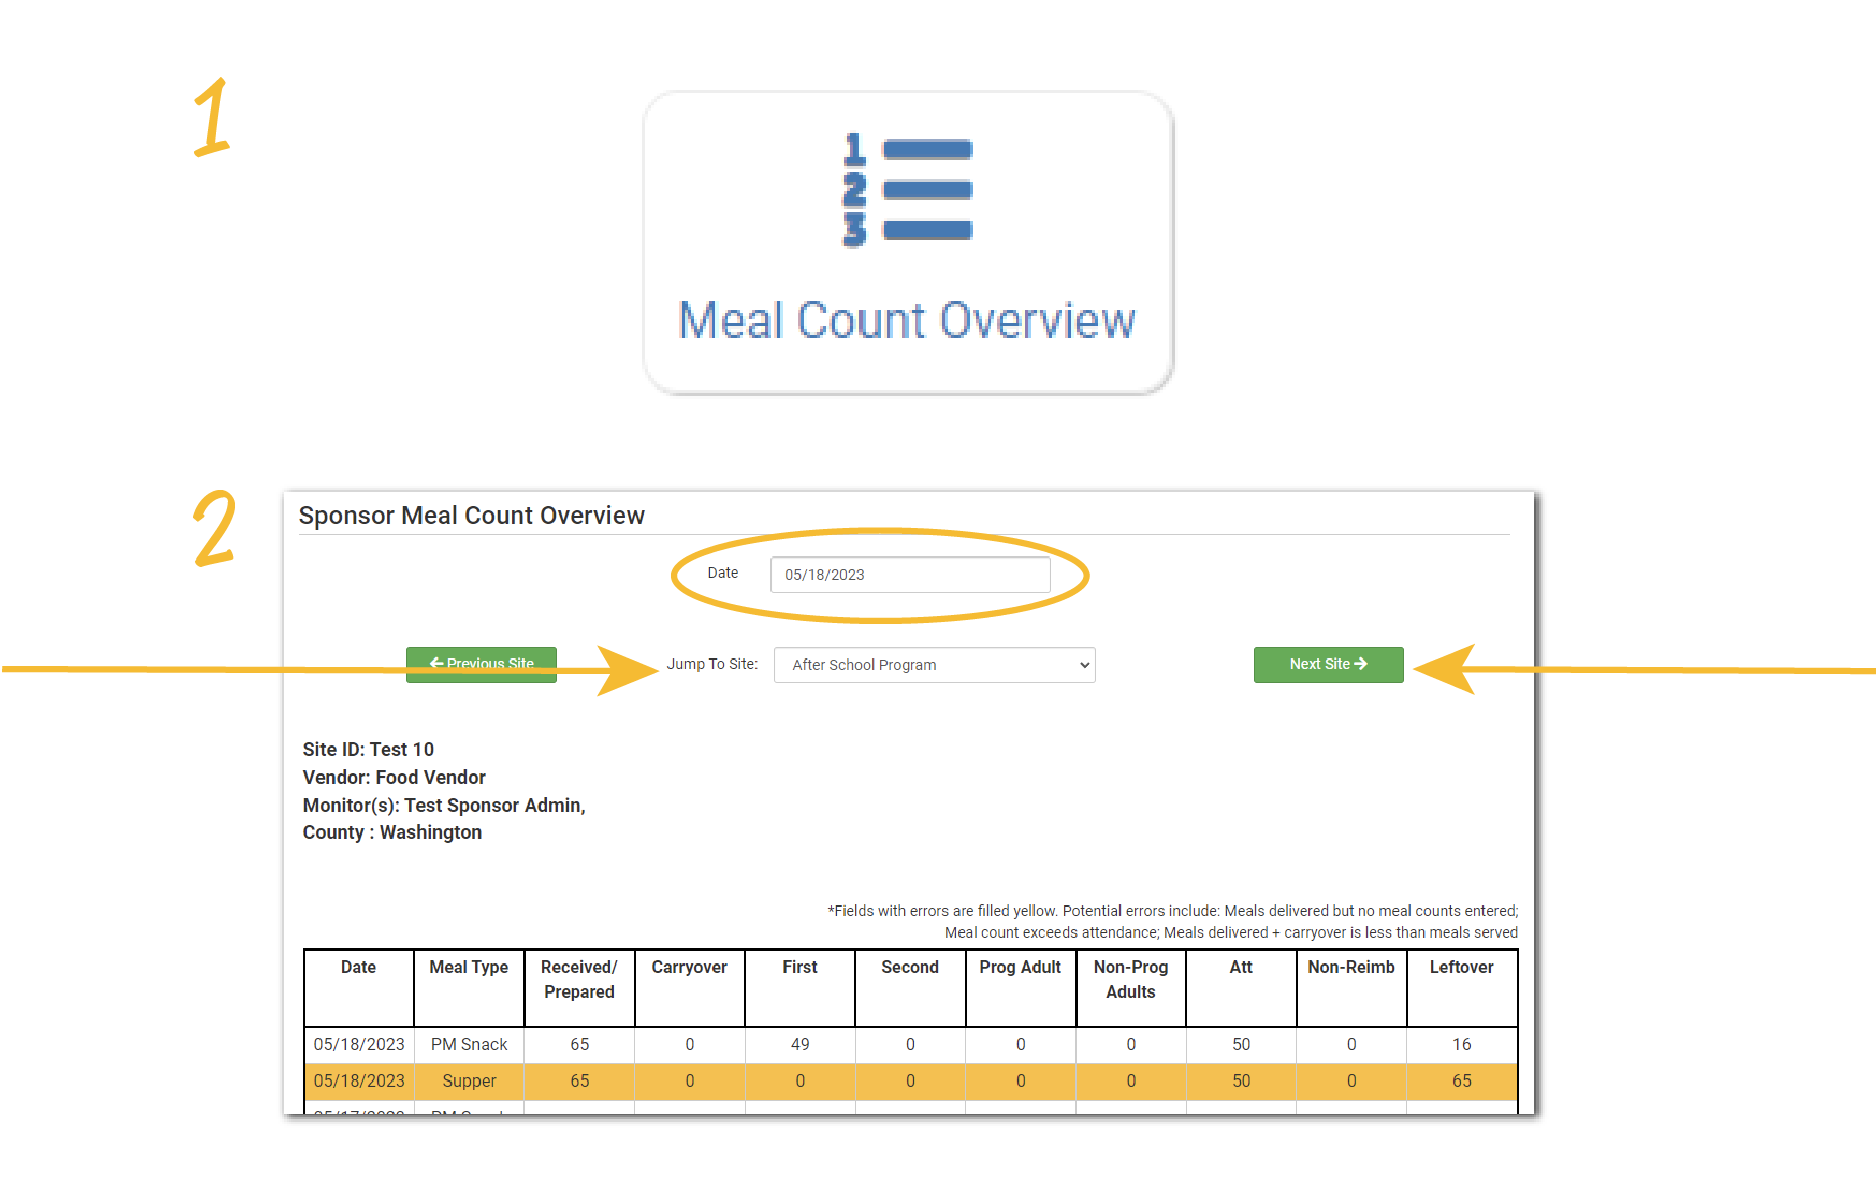 Meal Count Overview